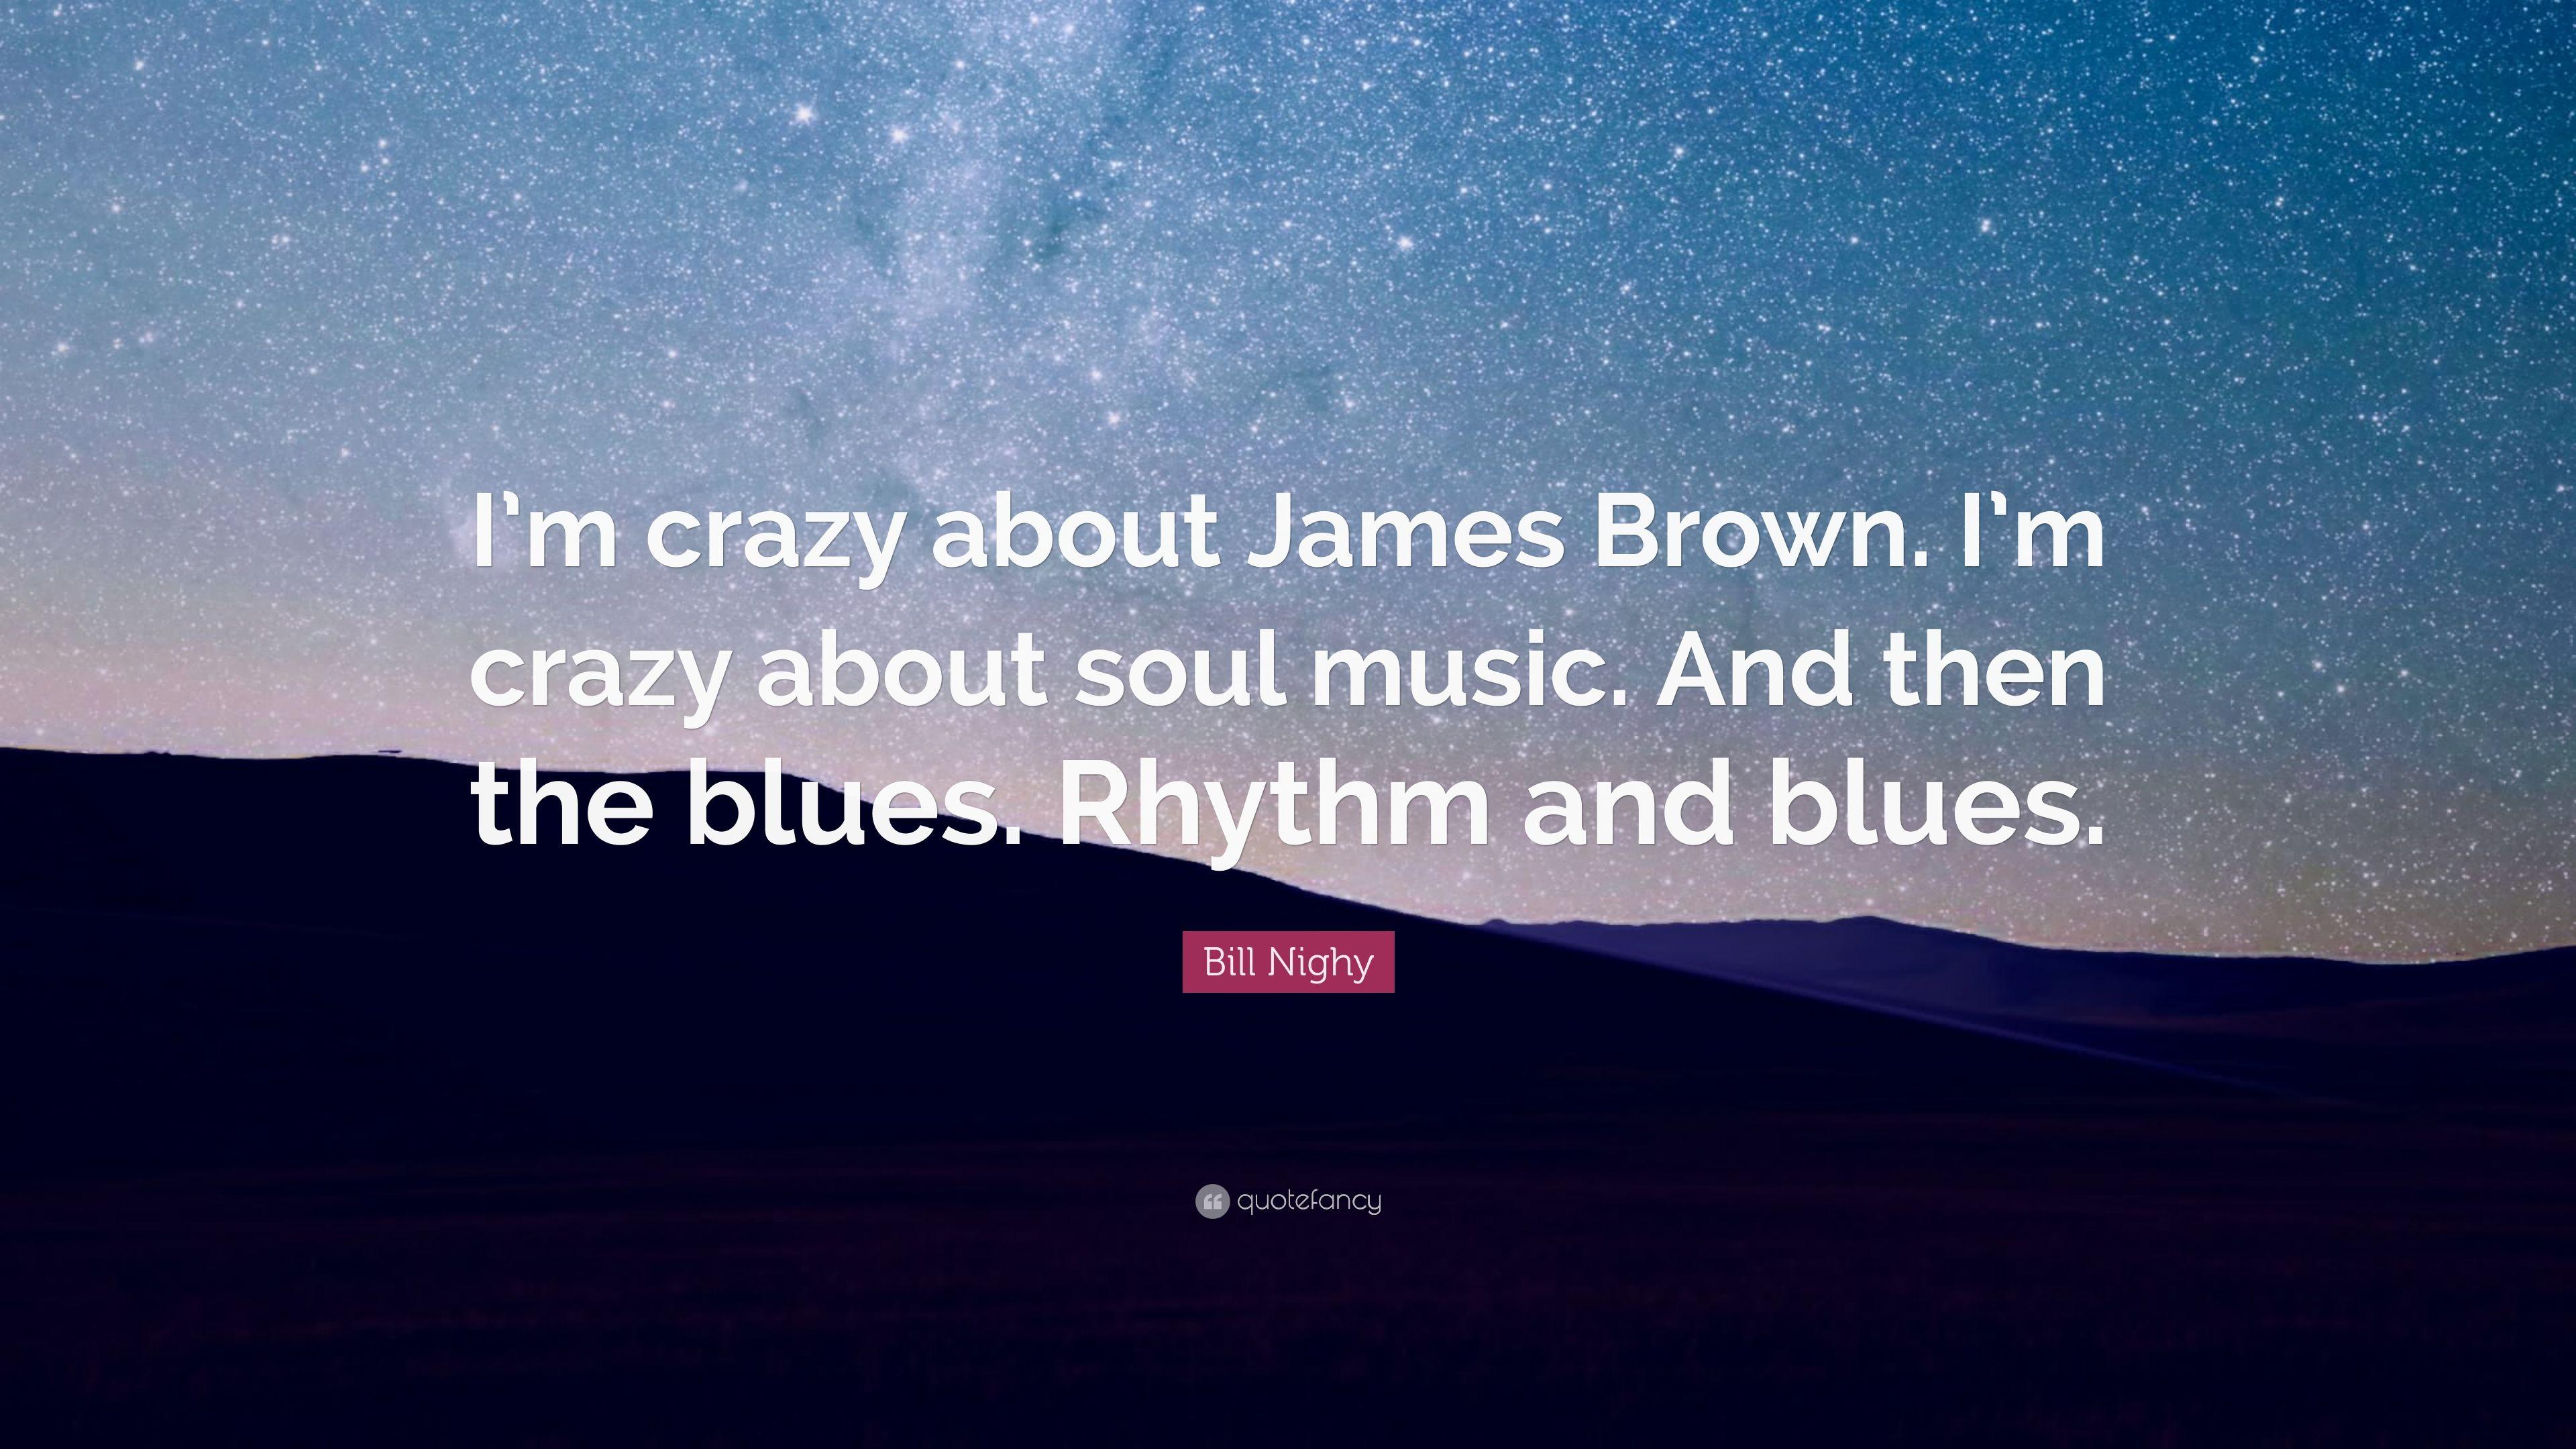 Bill Nighy Quote: “I'm crazy about James Brown. I'm crazy about soul